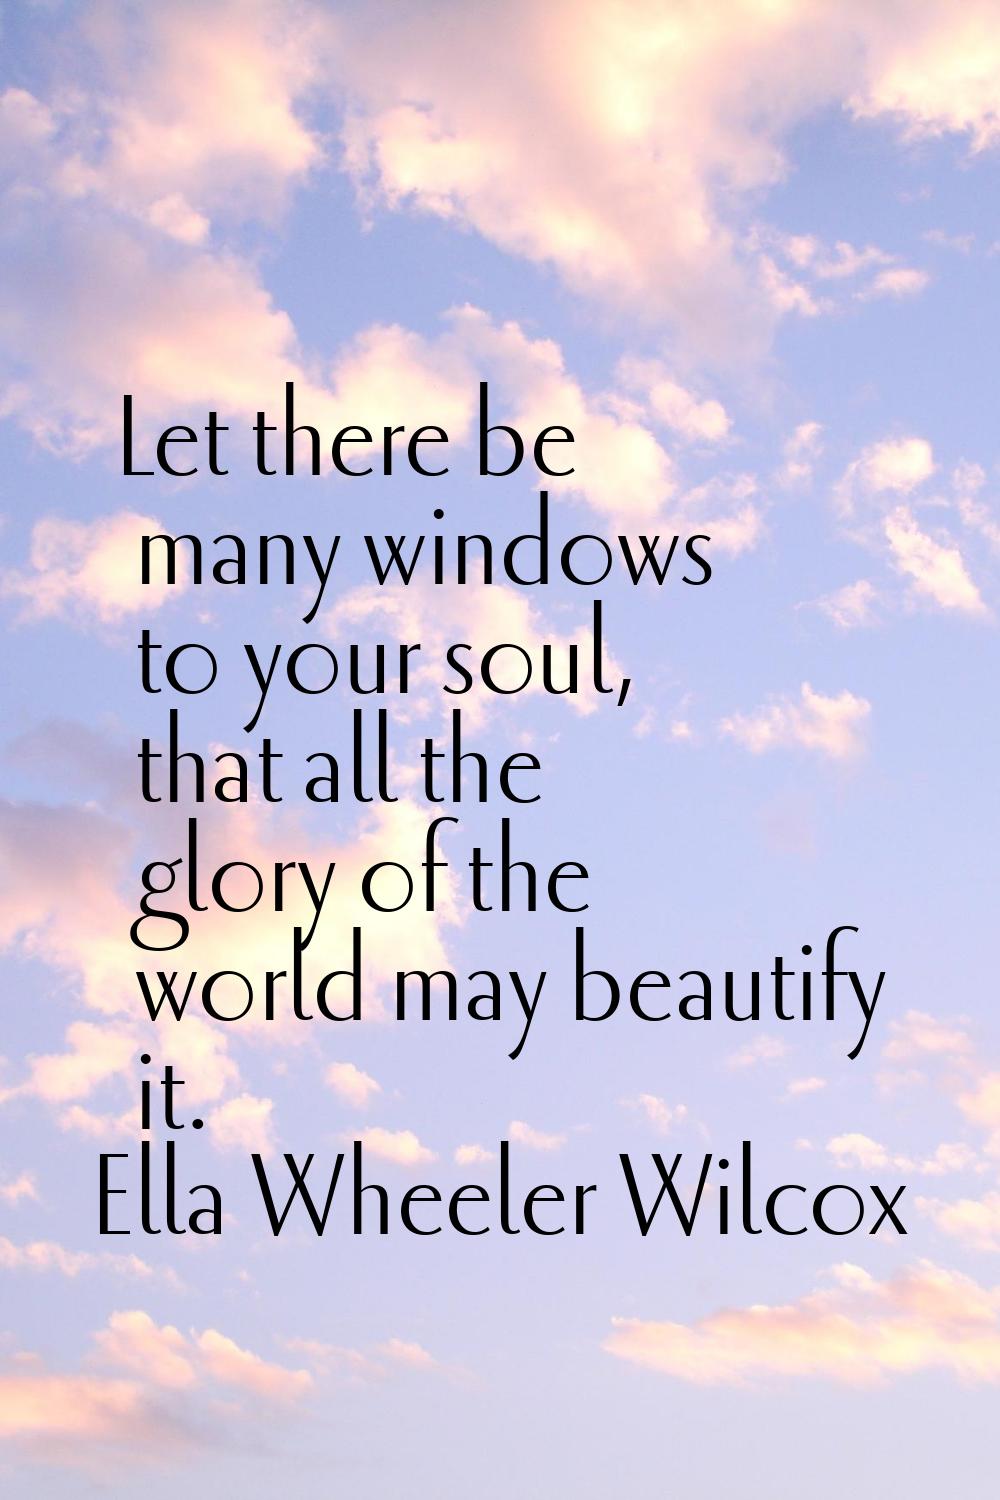 Let there be many windows to your soul, that all the glory of the world may beautify it.